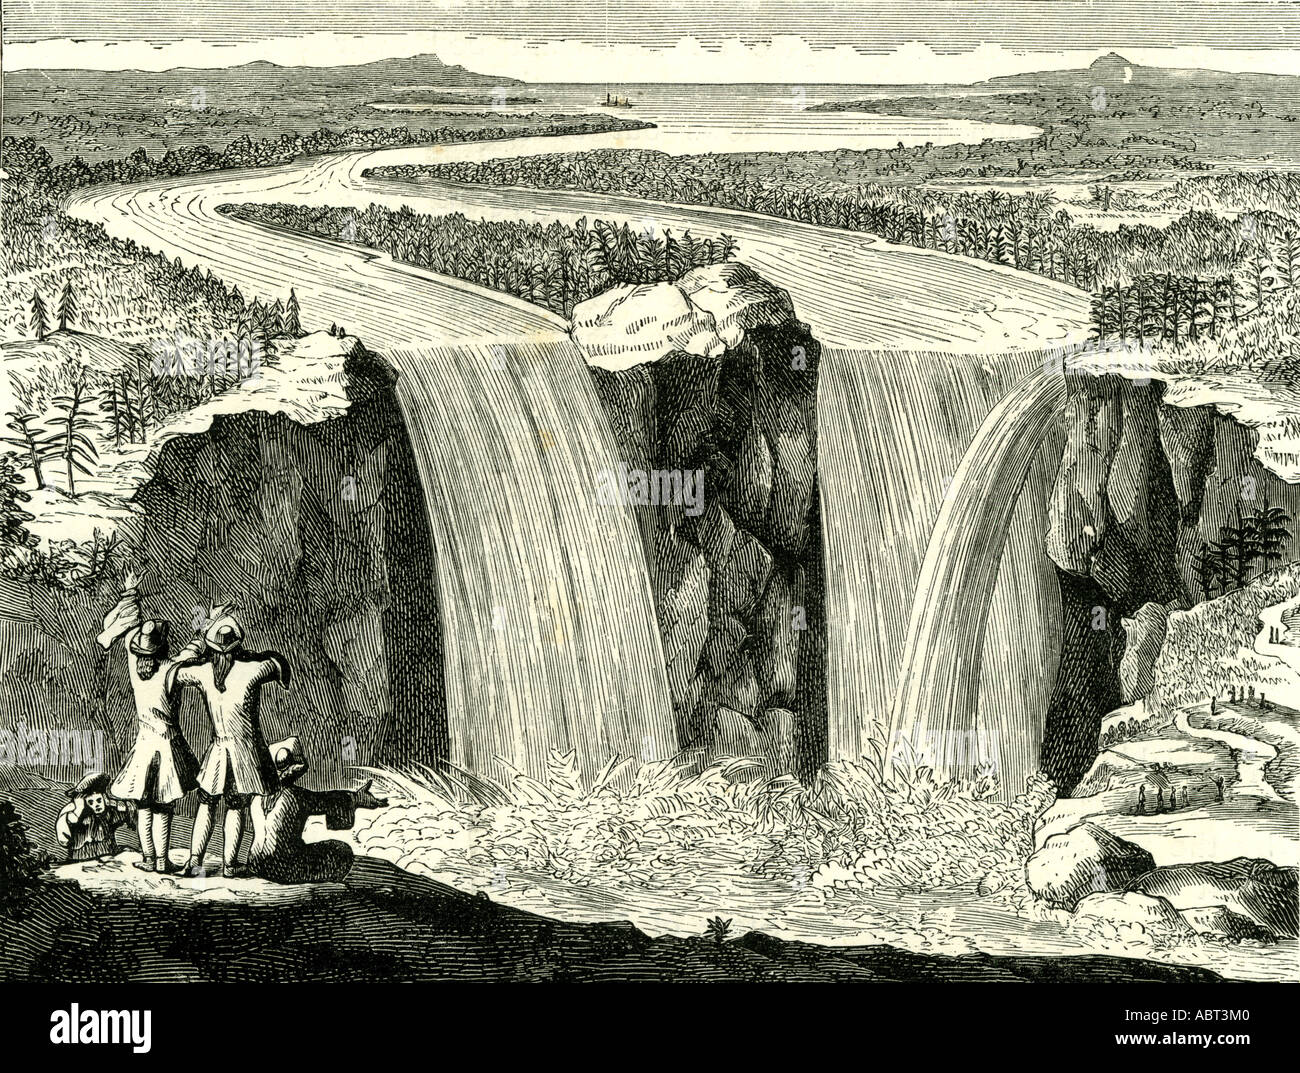 Hennepin's sketch of Niagara in 1678, USA, Waterfall, Landscape Stock Photo